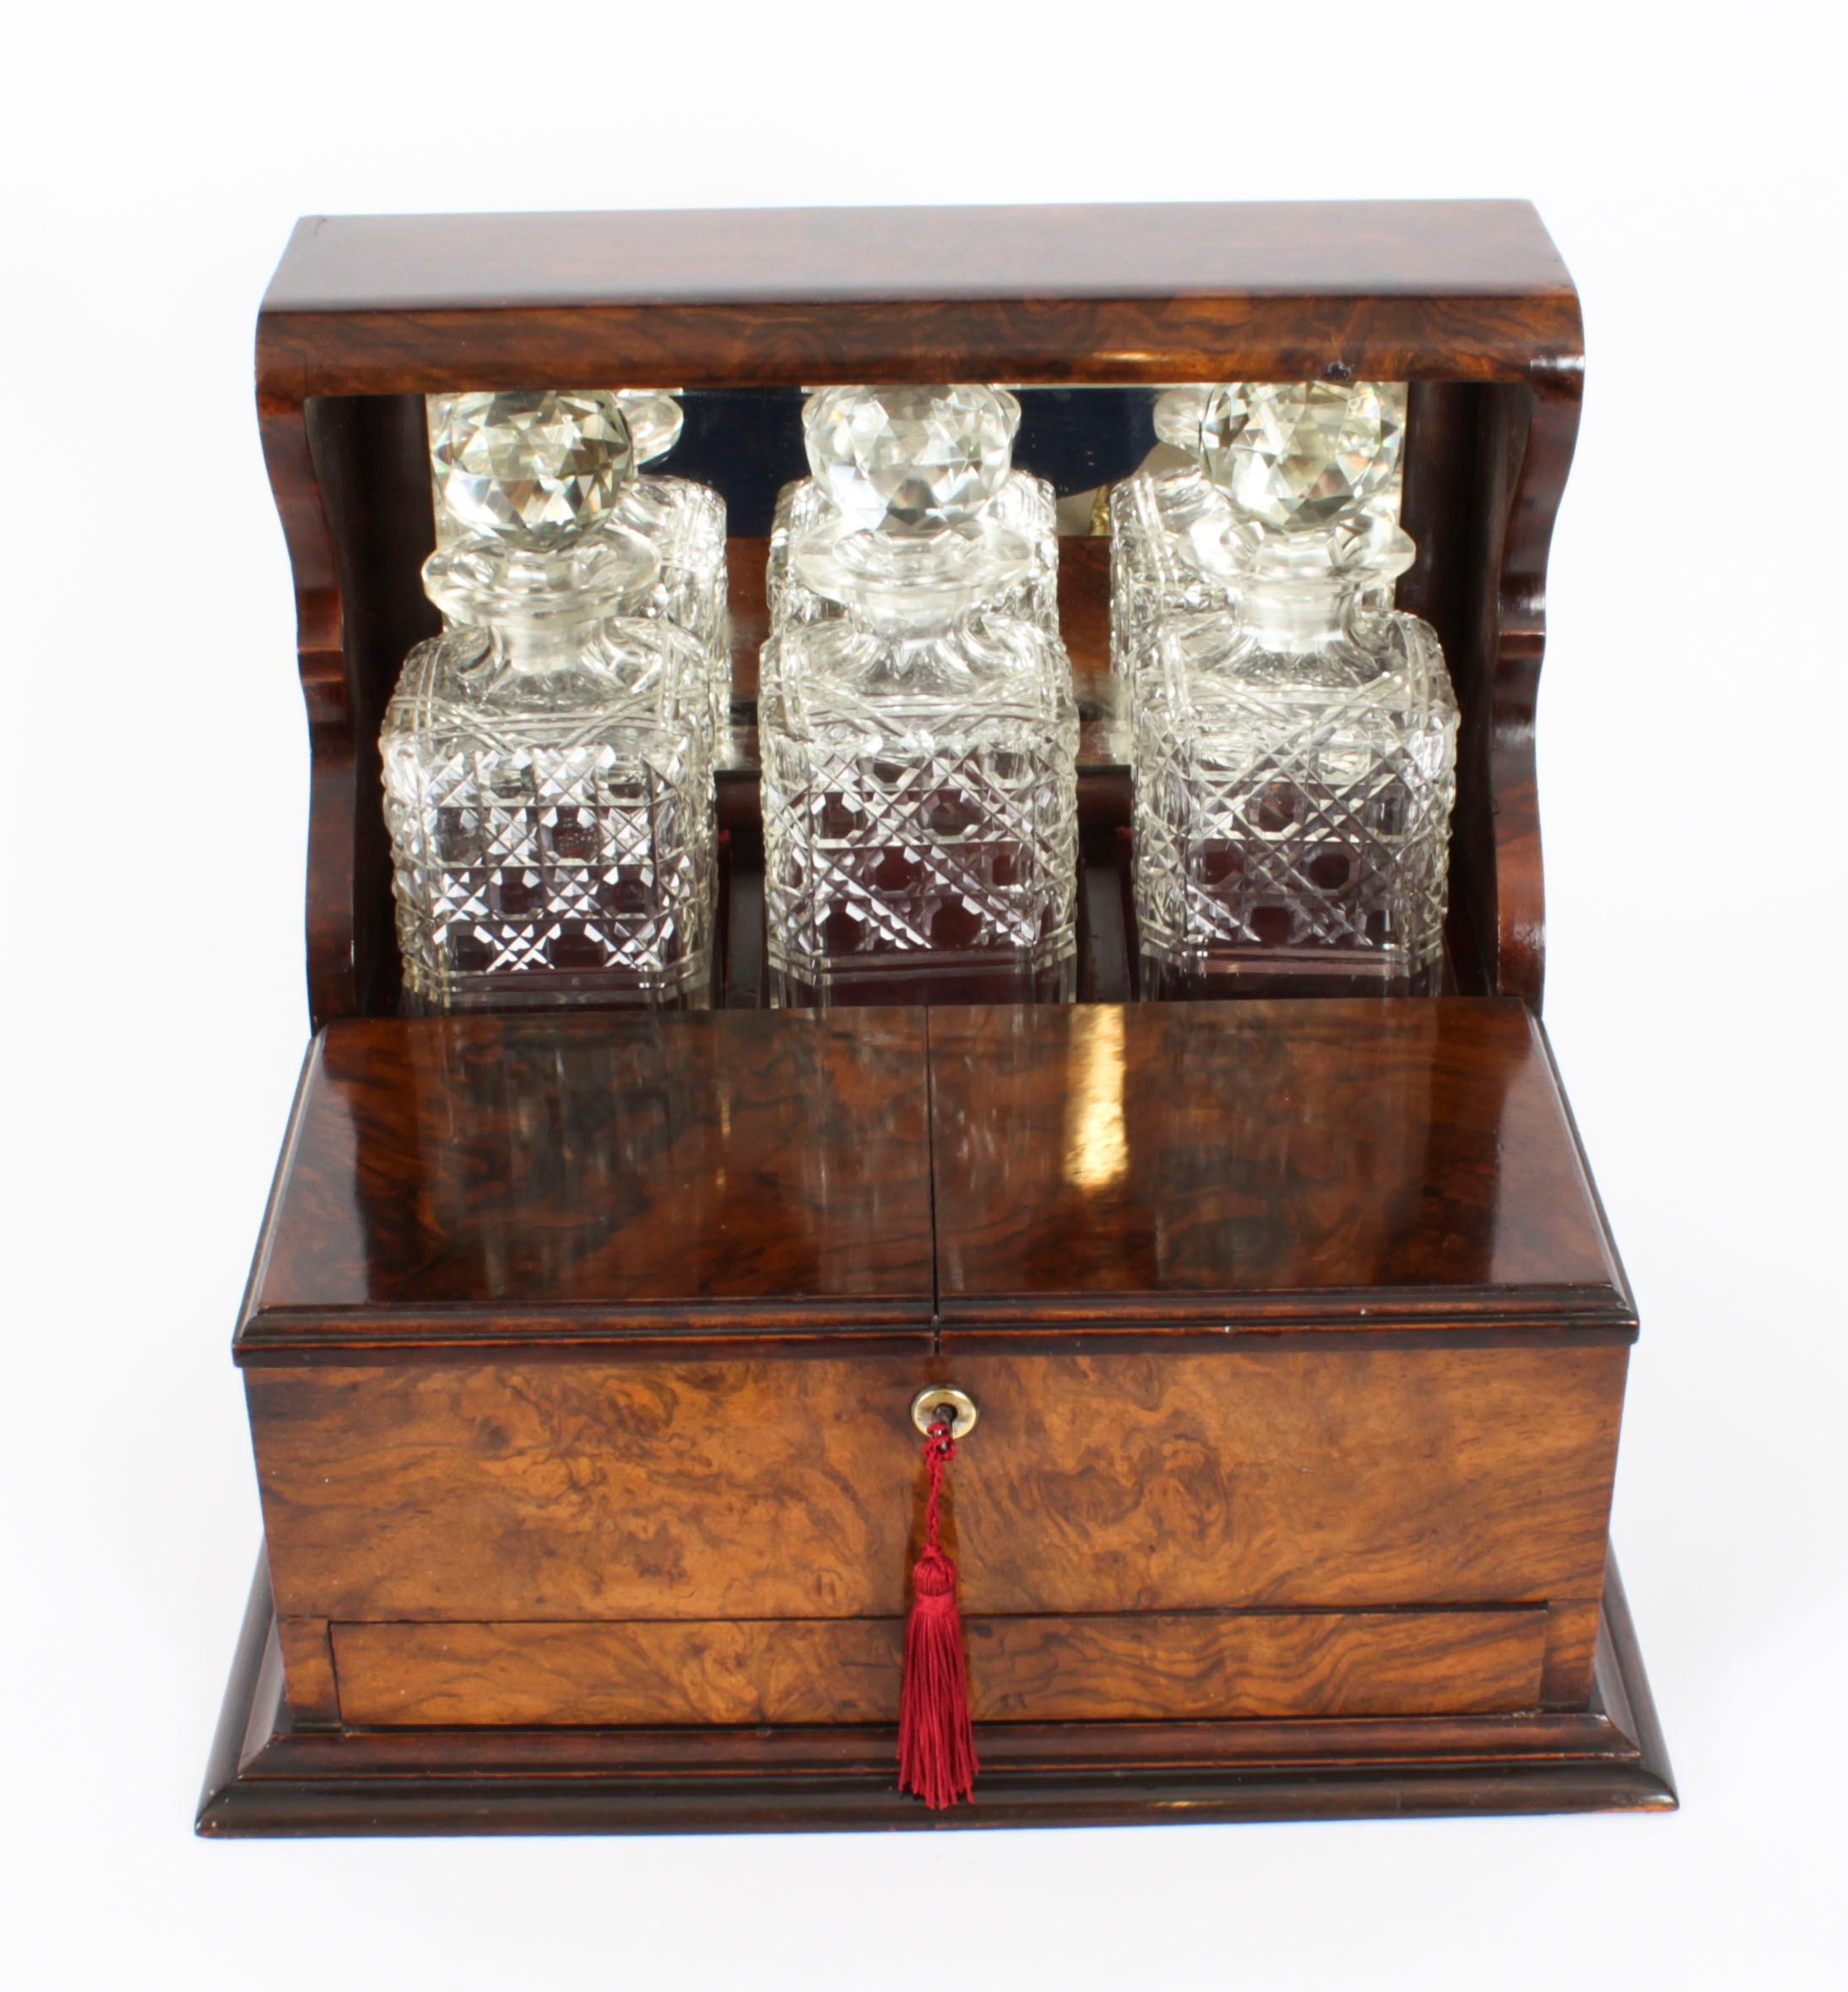 This is a superb antique Victorian burr walnut cased three decanter tantalus with decorativecut brass carry handles to the sides, circa 1880 in date.
 
This magnificent tantalus features three wonderful hobnail cut square decanters with faceted